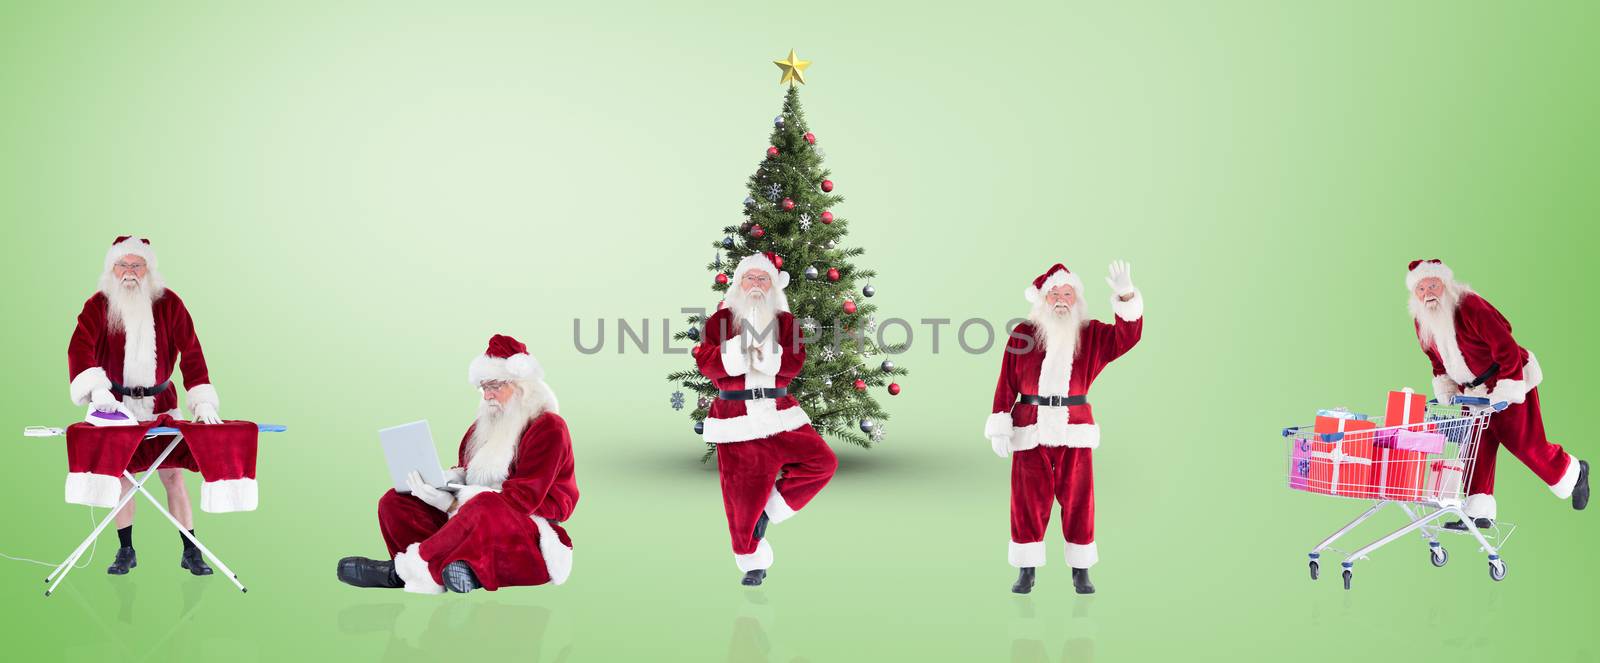 Composite image of different santas by Wavebreakmedia